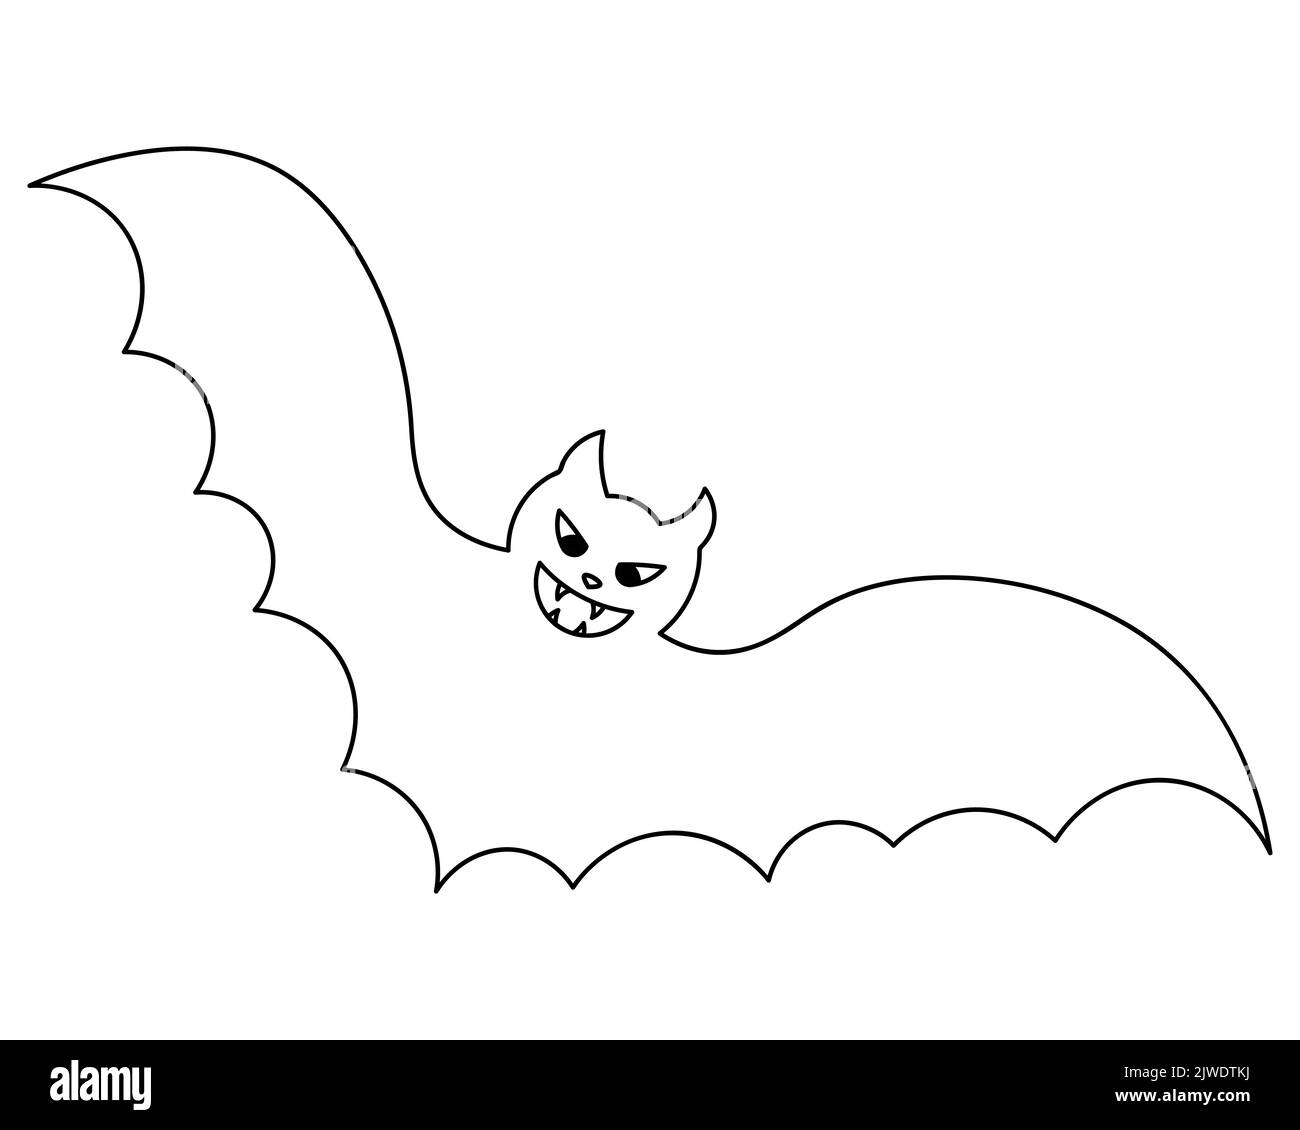 Bat. Sketch. Vampire animal. Angry grin. A blood-sucking mammal. Halloween symbol.Vector illustration. Outline on an isolated white background. Stock Vector